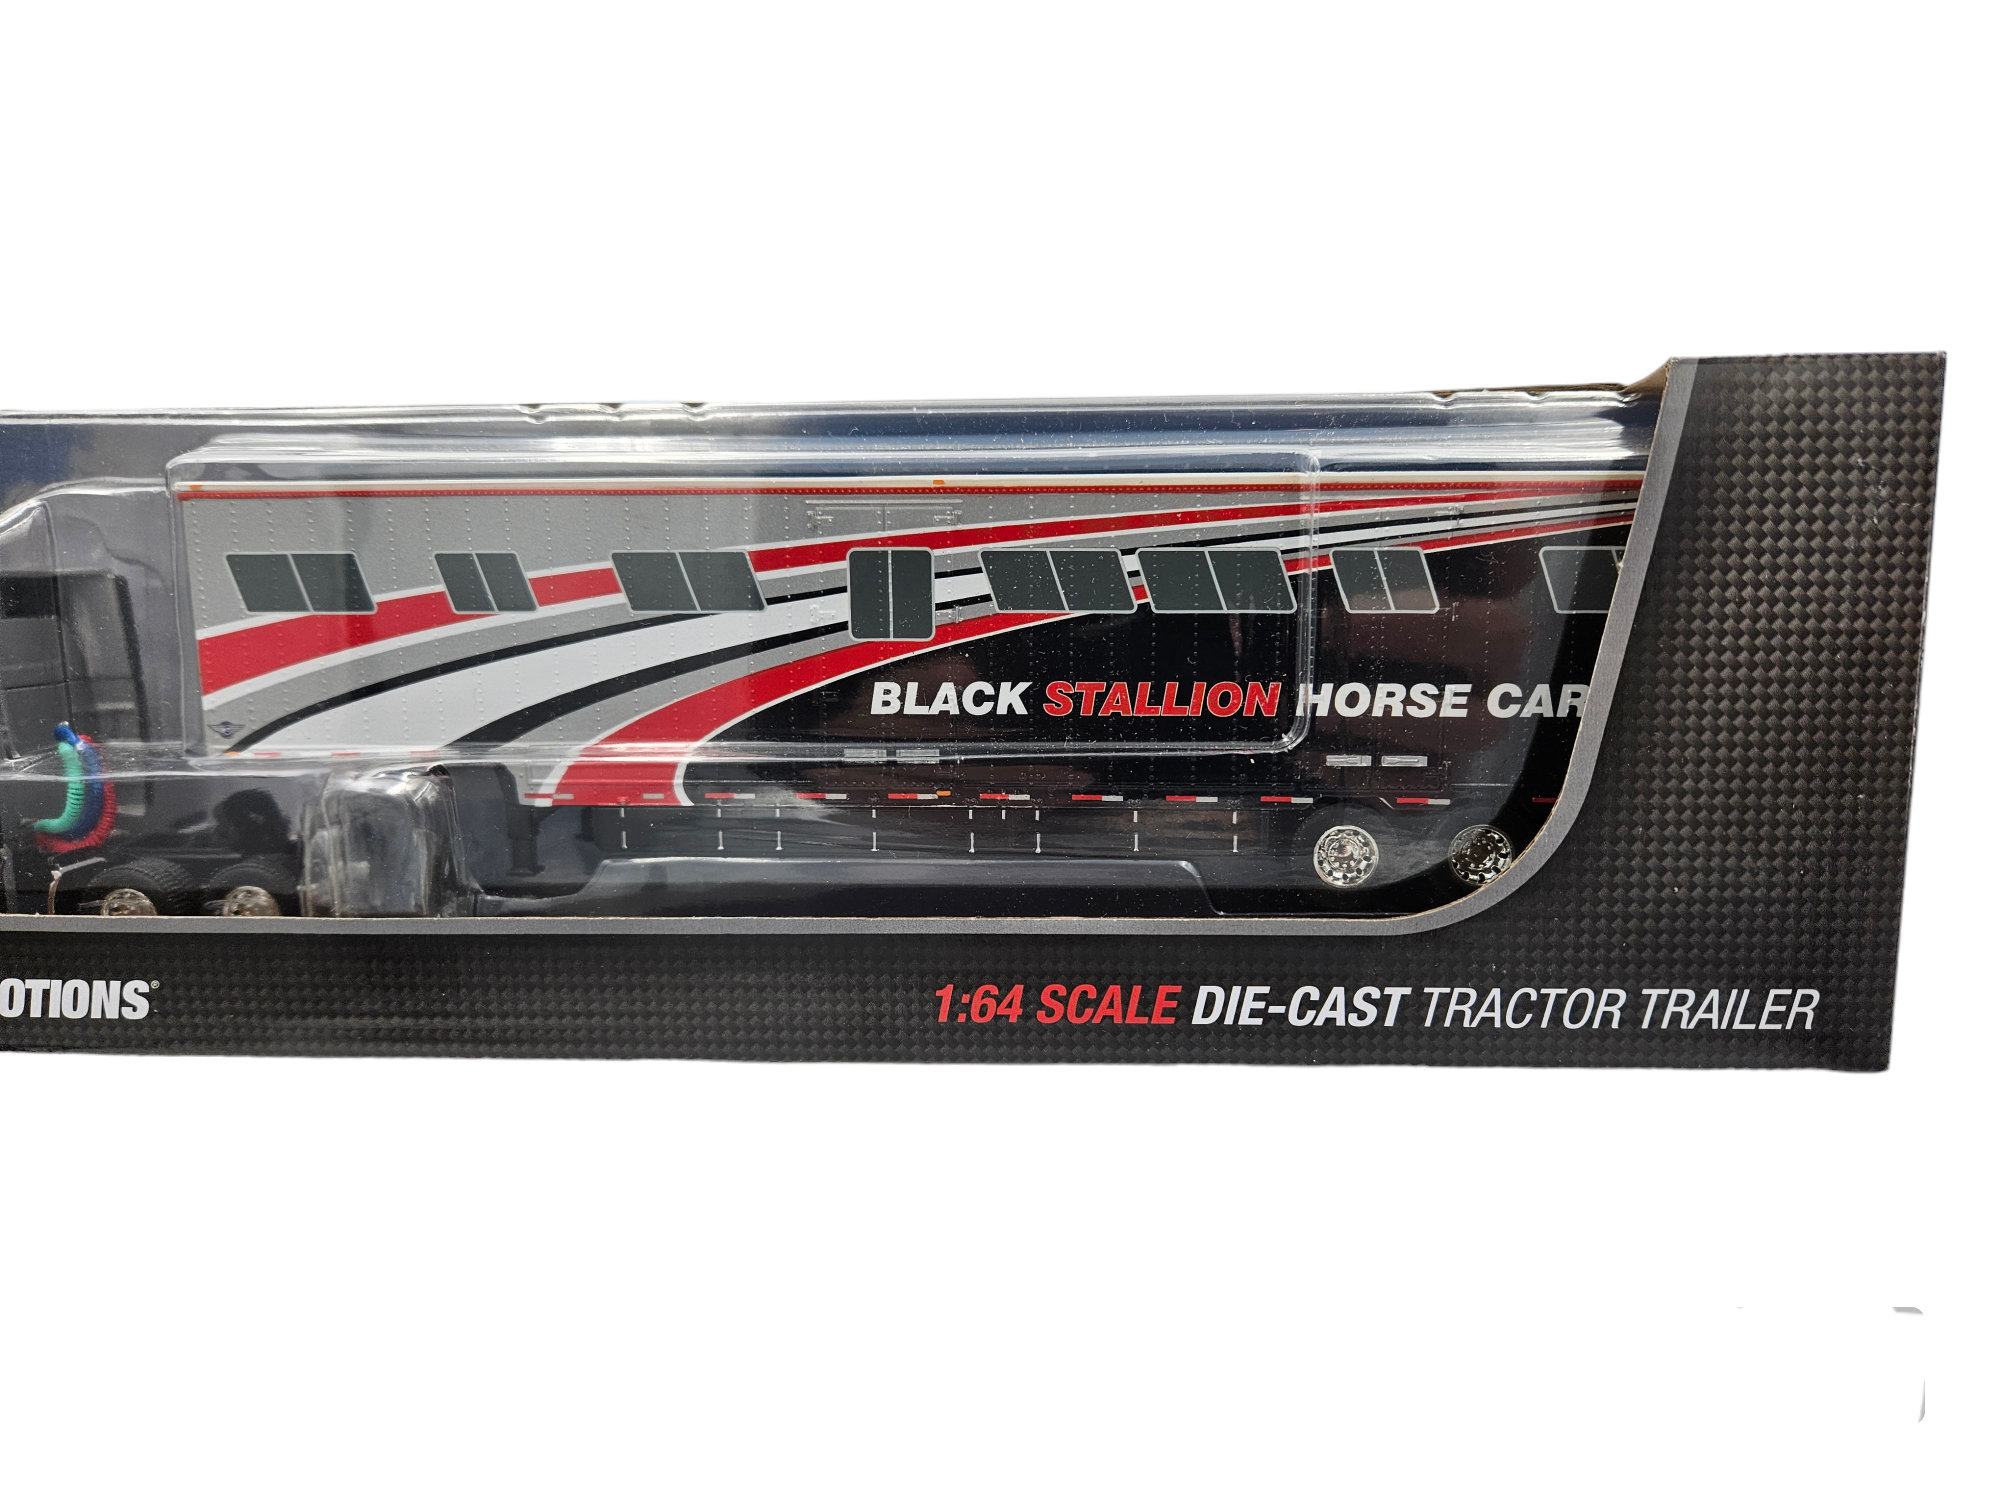 BLACK STALLION, WESTERN STAR 5700XE HIGH ROOF TRUCK W/KENTUCKY MOVING TRAILER by DCP 1//64